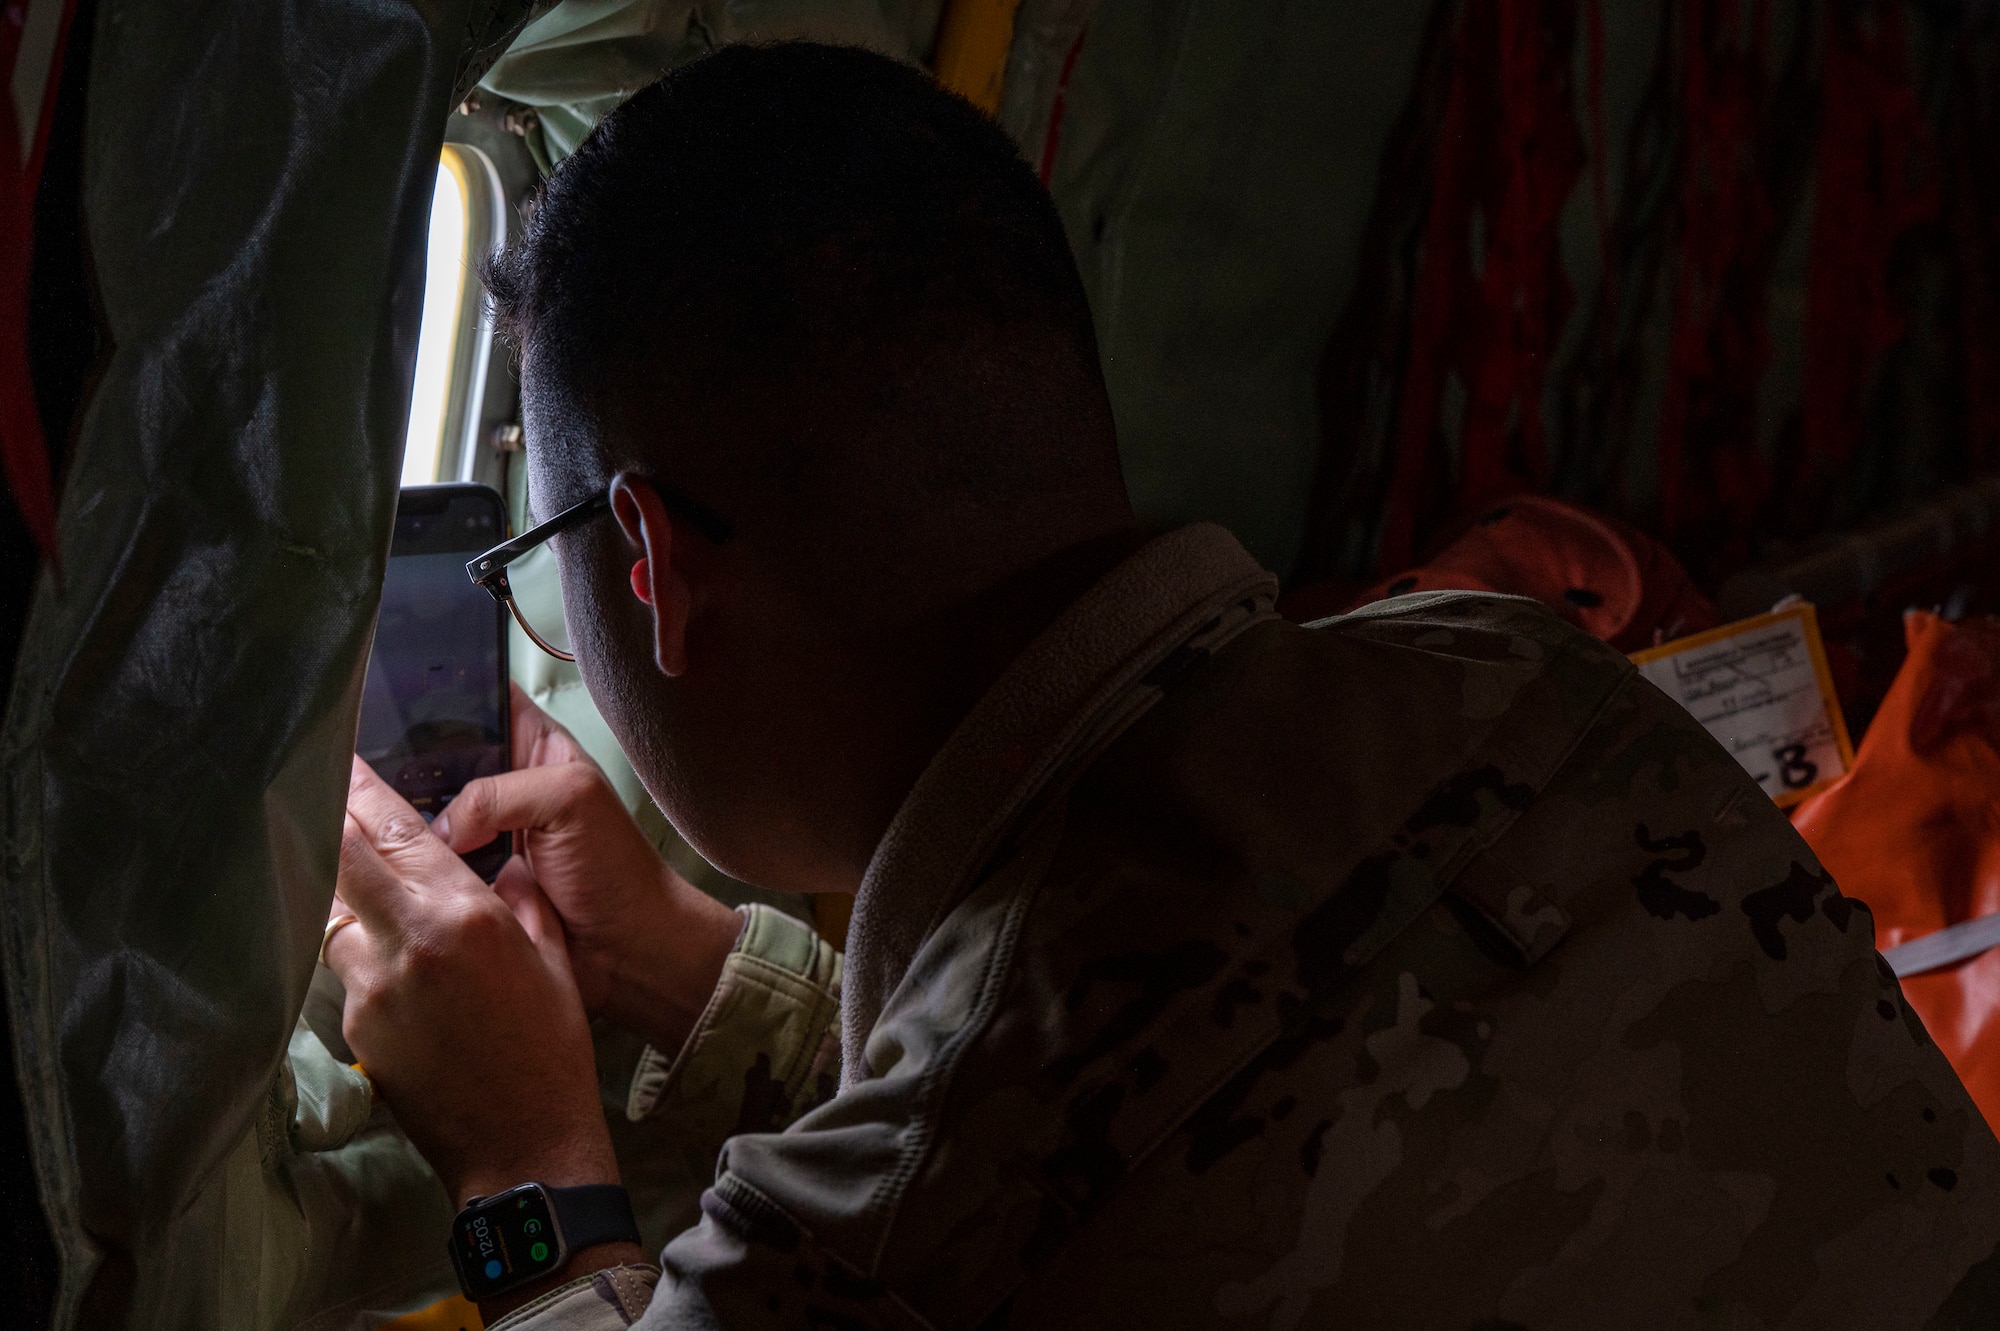 An Airman takes a photo with his cell phone of the sky through the window of a KC 135 Stratotanker.